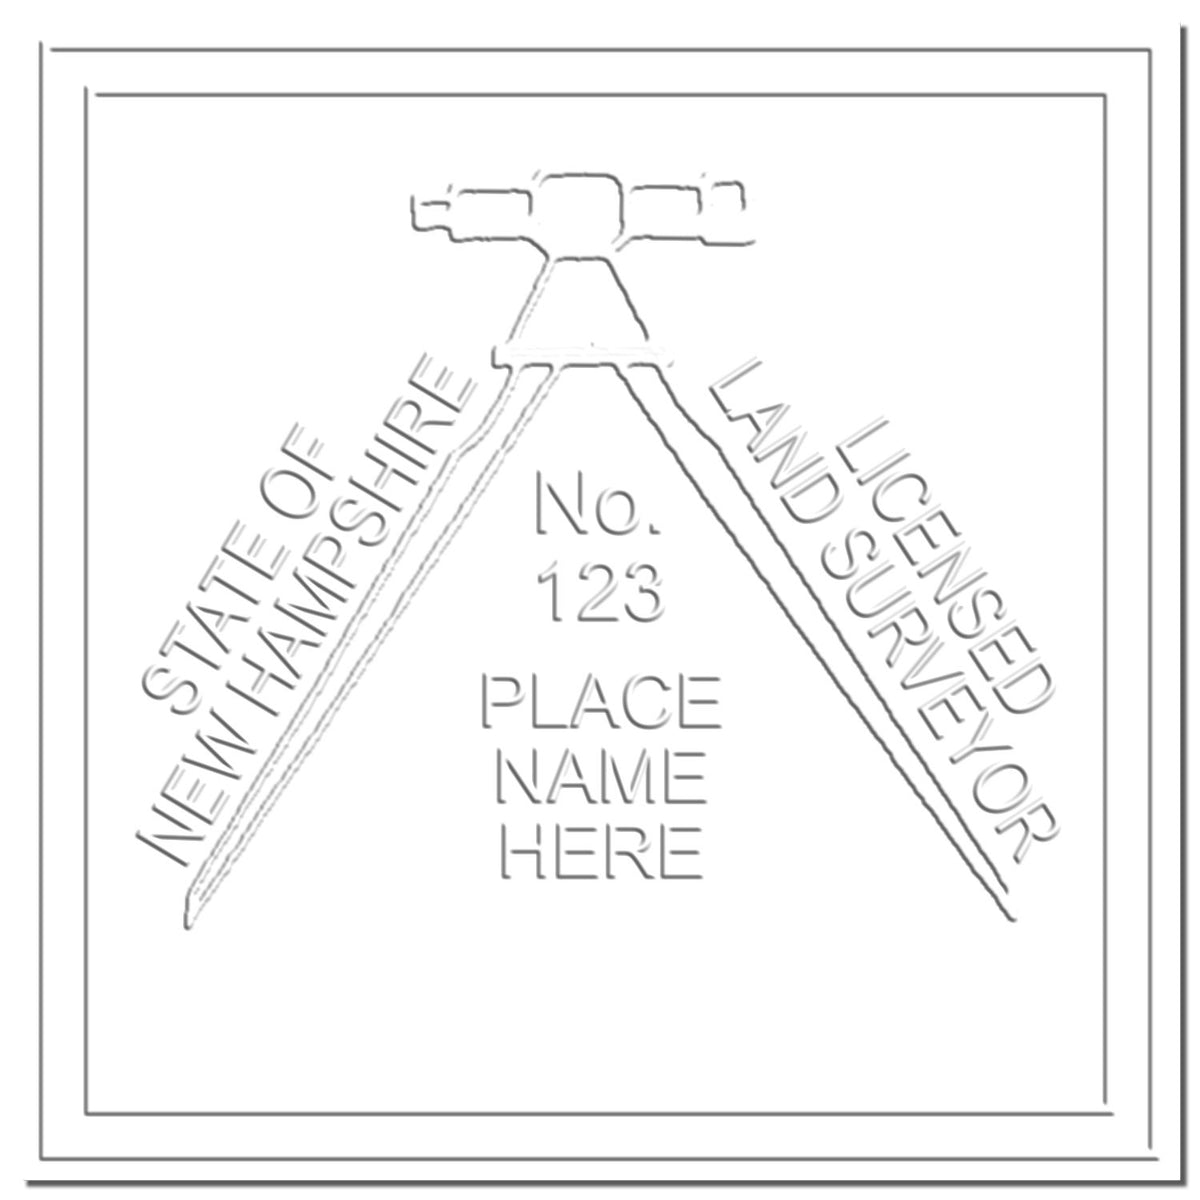 This paper is stamped with a sample imprint of the State of New Hampshire Soft Land Surveyor Embossing Seal, signifying its quality and reliability.